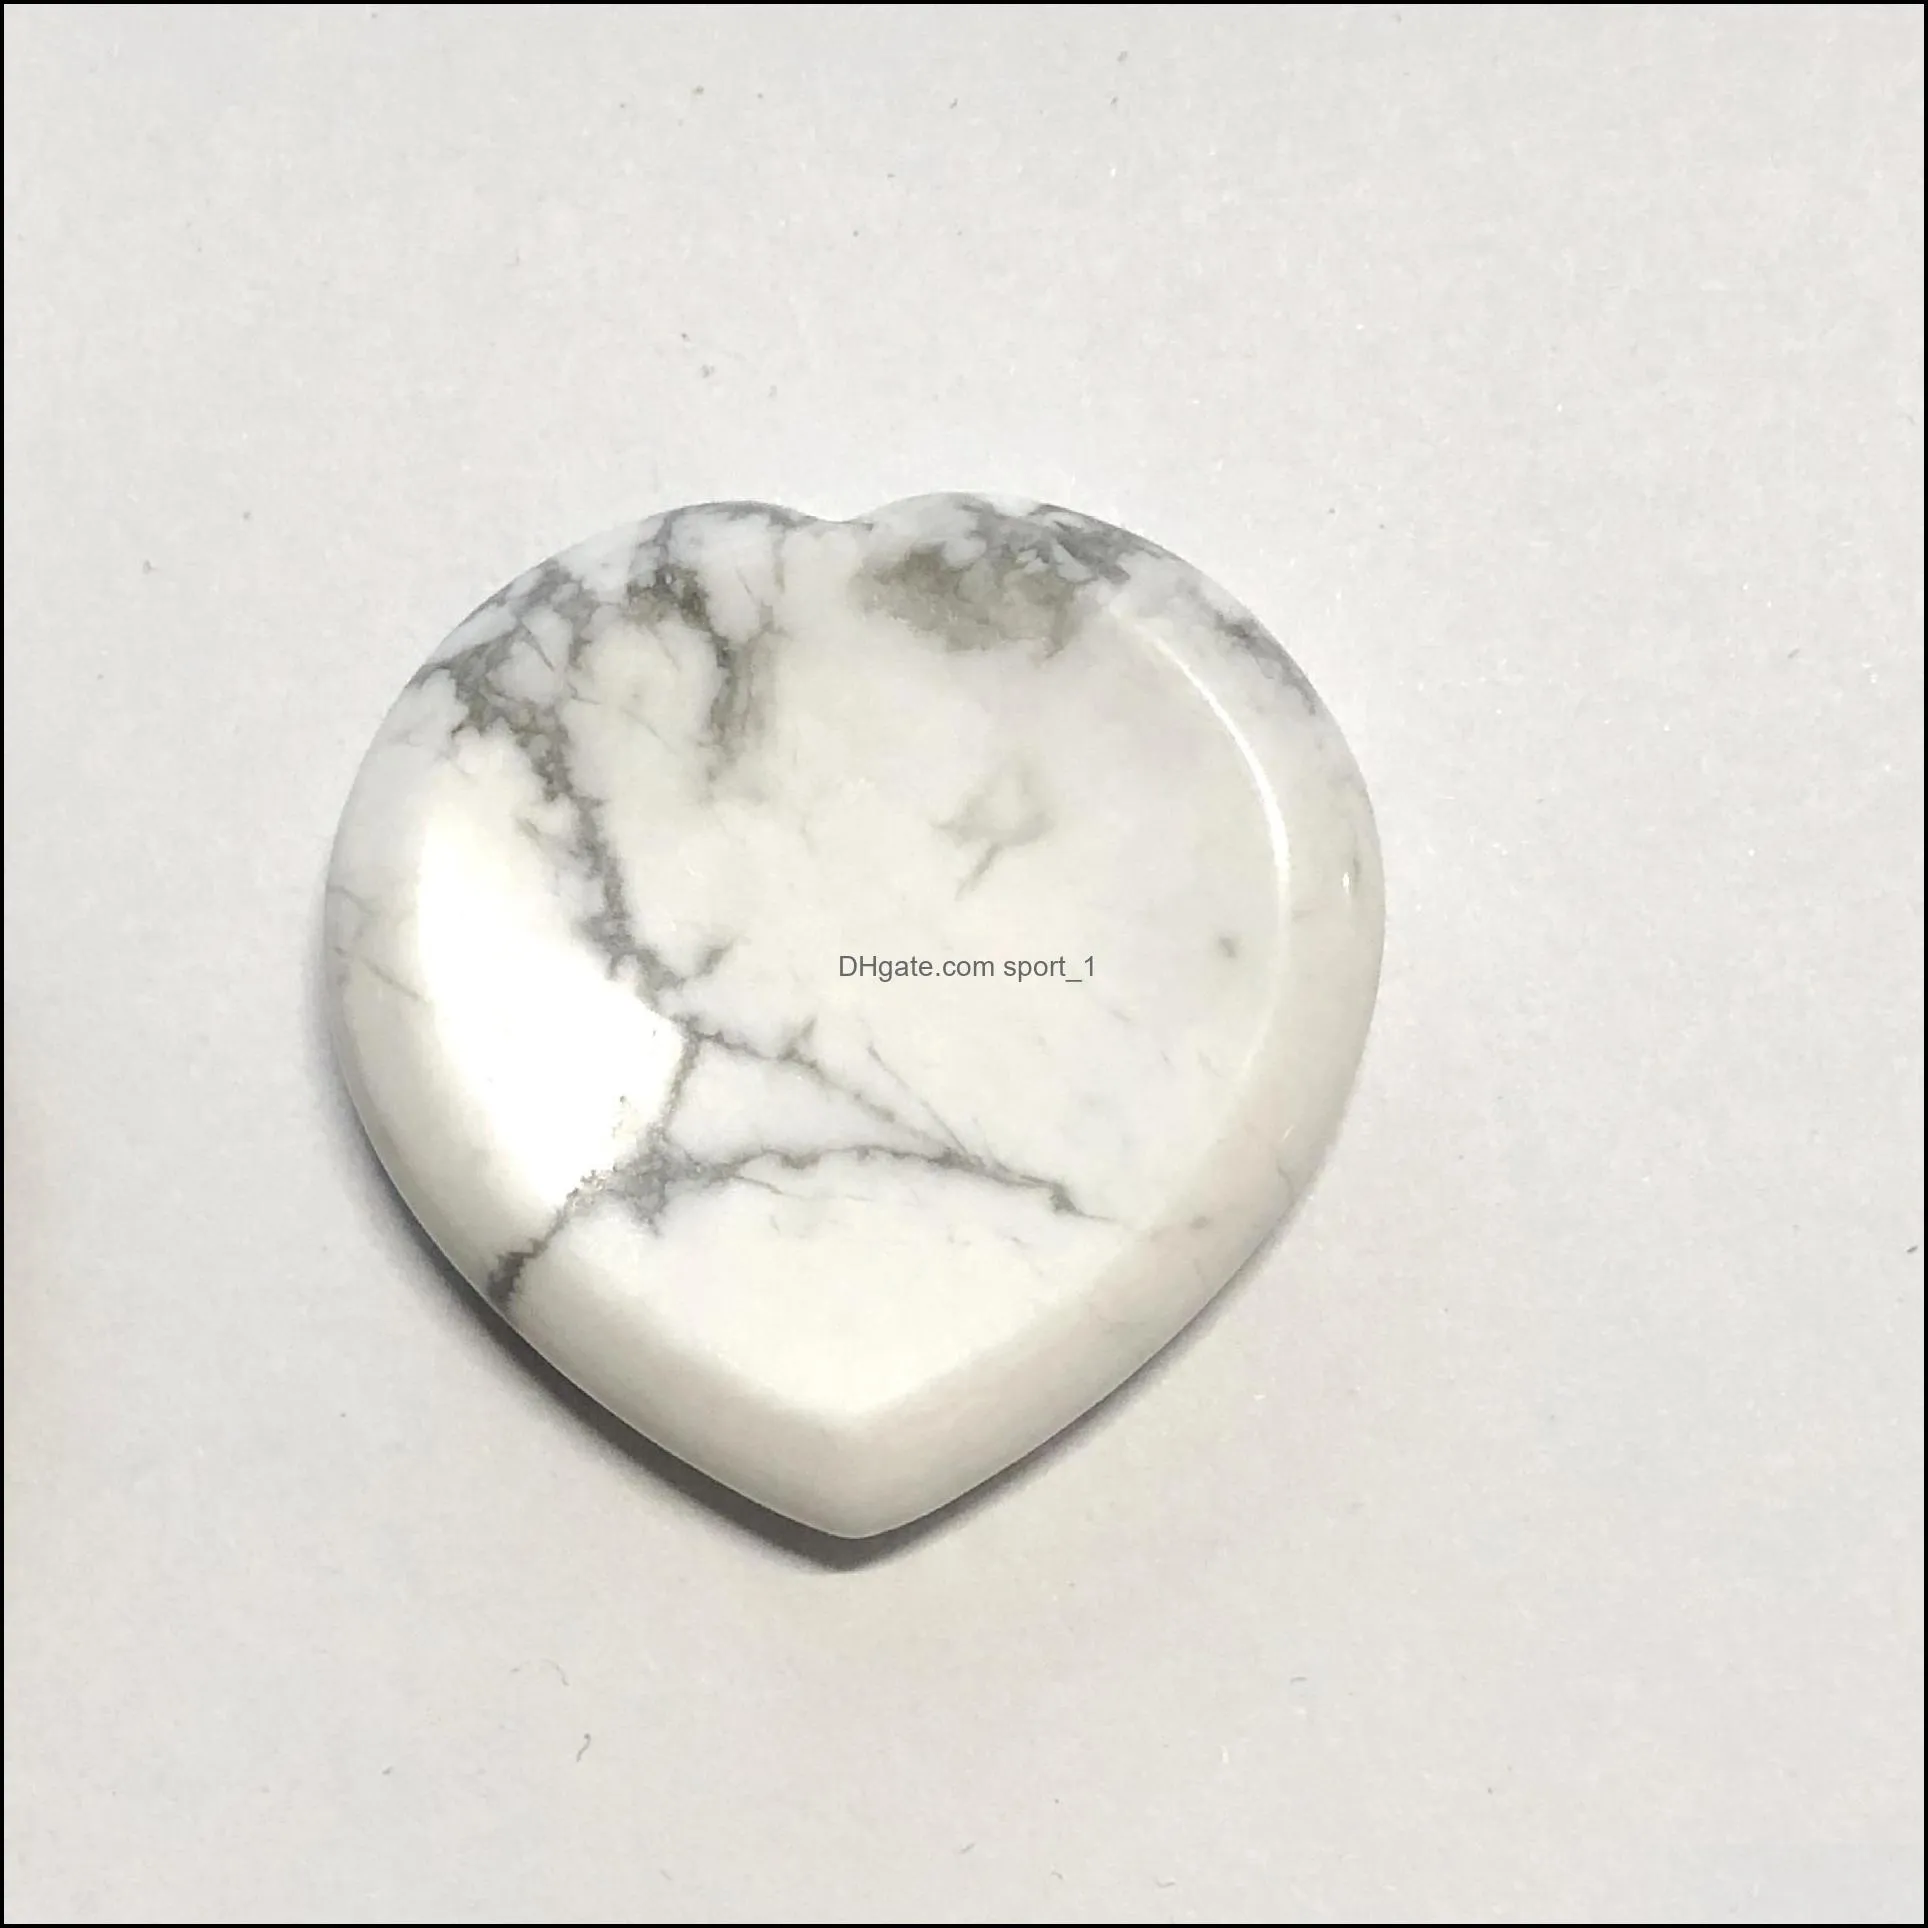 40*7mm heart worry stone thumb gemstone natural healing crystals therapy reiki treatment spiritual minerals massage palm gem